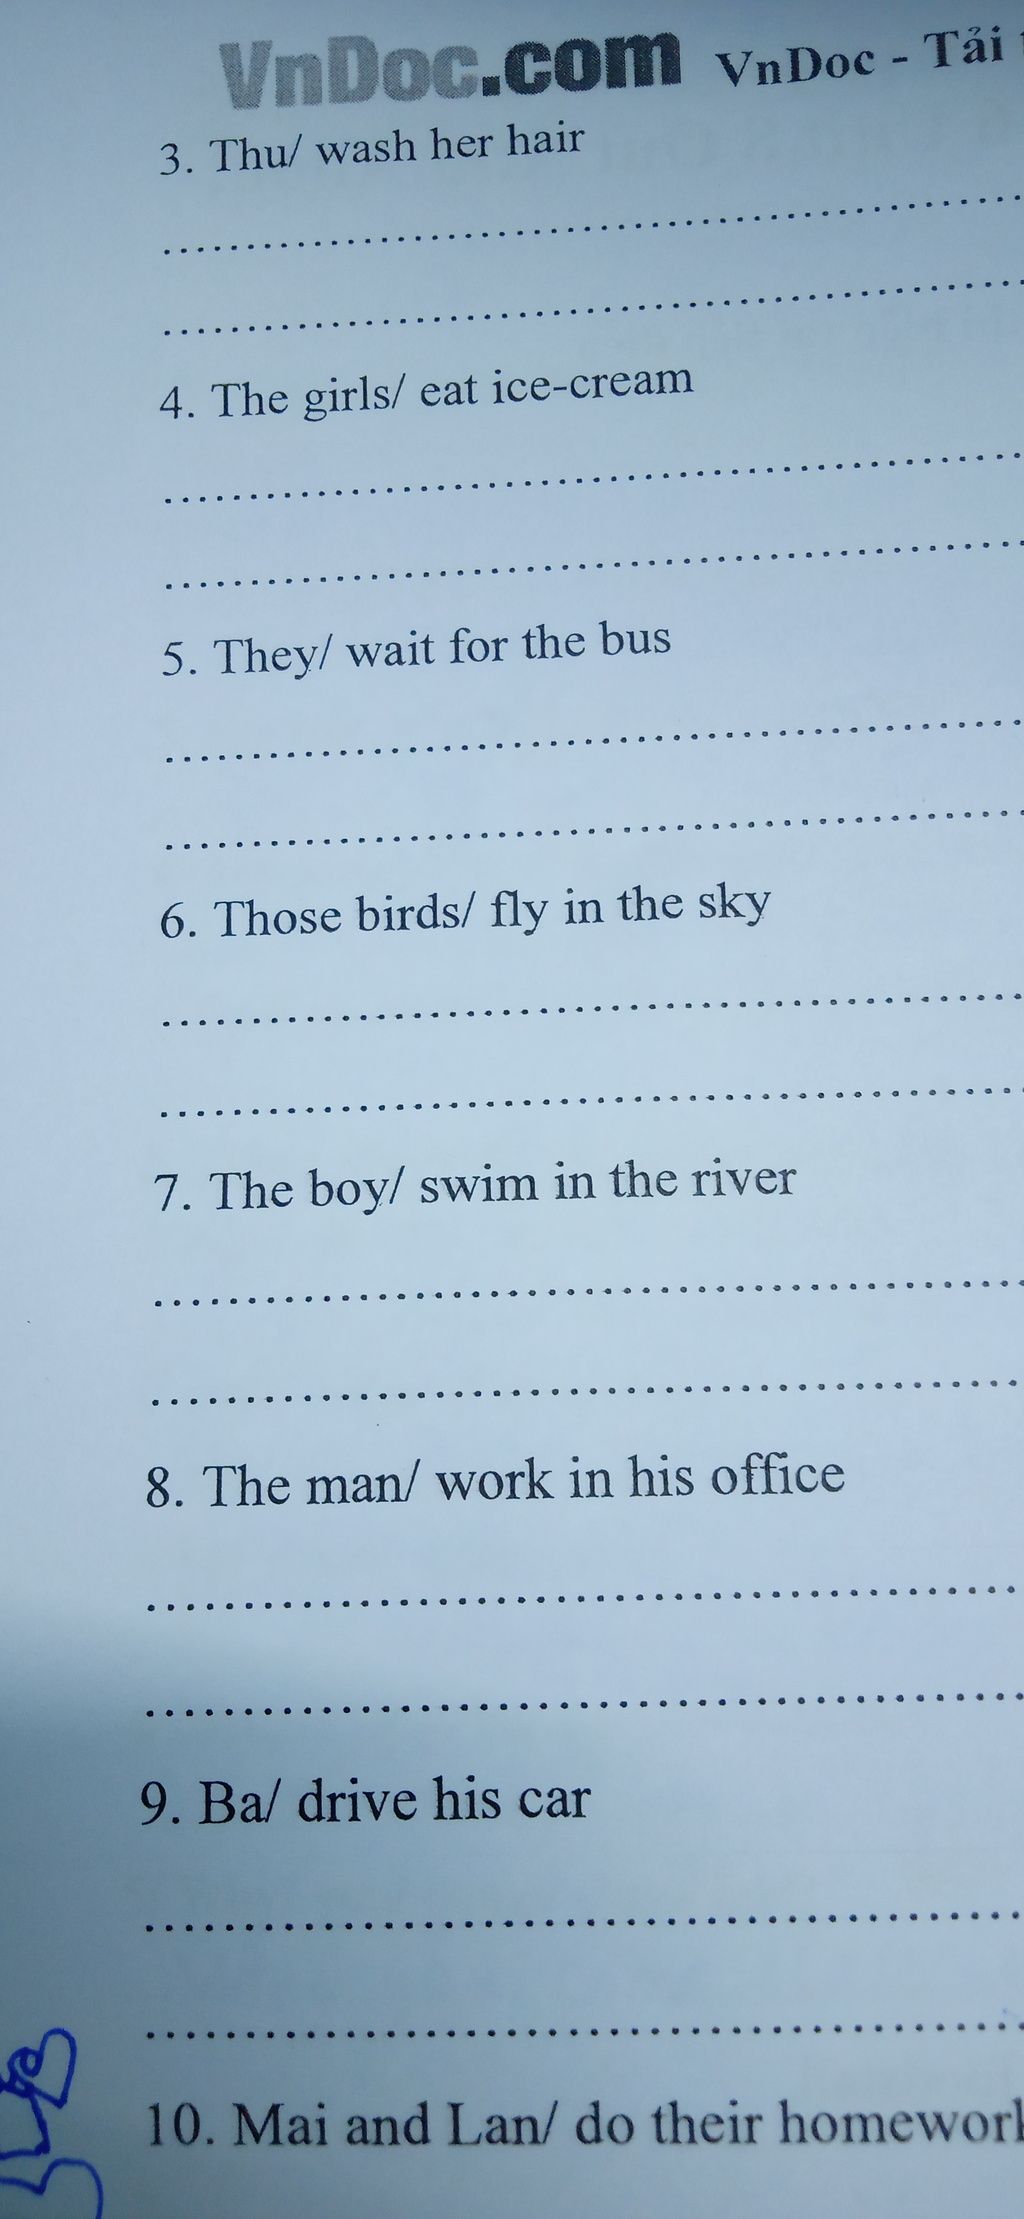 3. Thu/ wash her hair 4. The girls/ eat ice-cream 5. They/ wait for the bus  6. Those birds/ fly in the sky 7. The boy/ swim in the river 8. The man/  work in hi